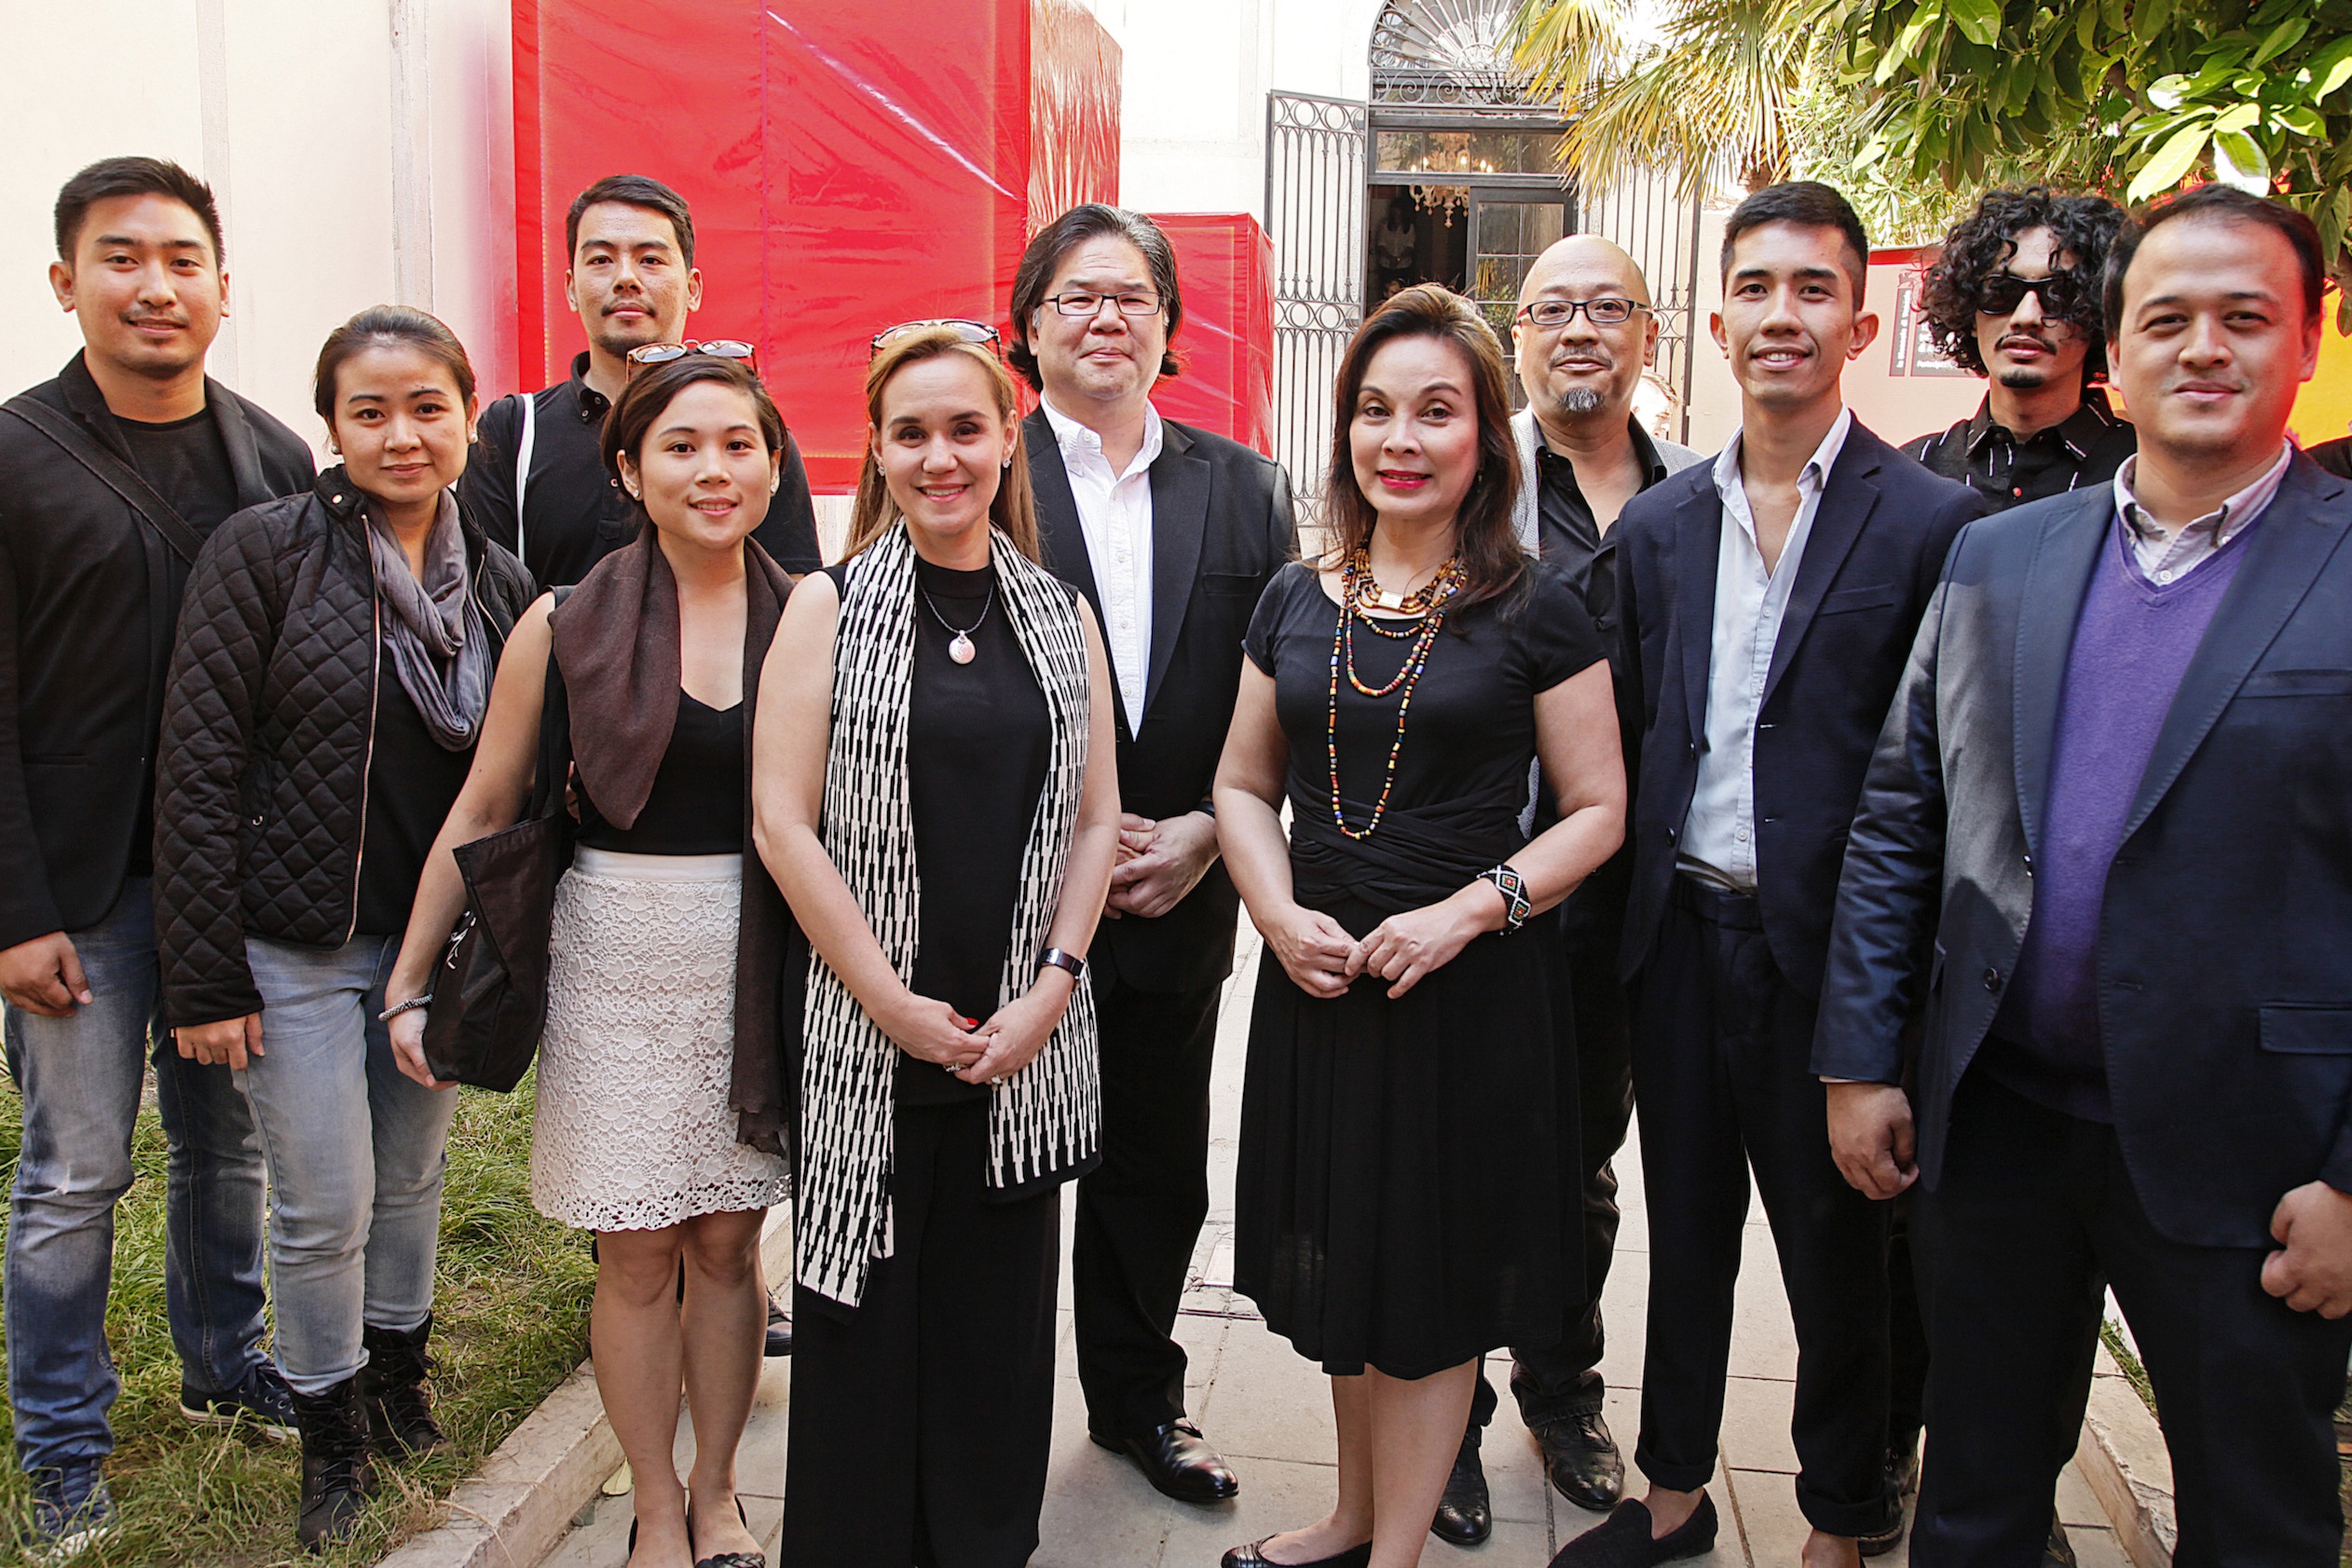 Vernissage of the Philippine Pavilion in the 15th Architecture Venice Biennale “Muhon: Traces of an Adolescent City”